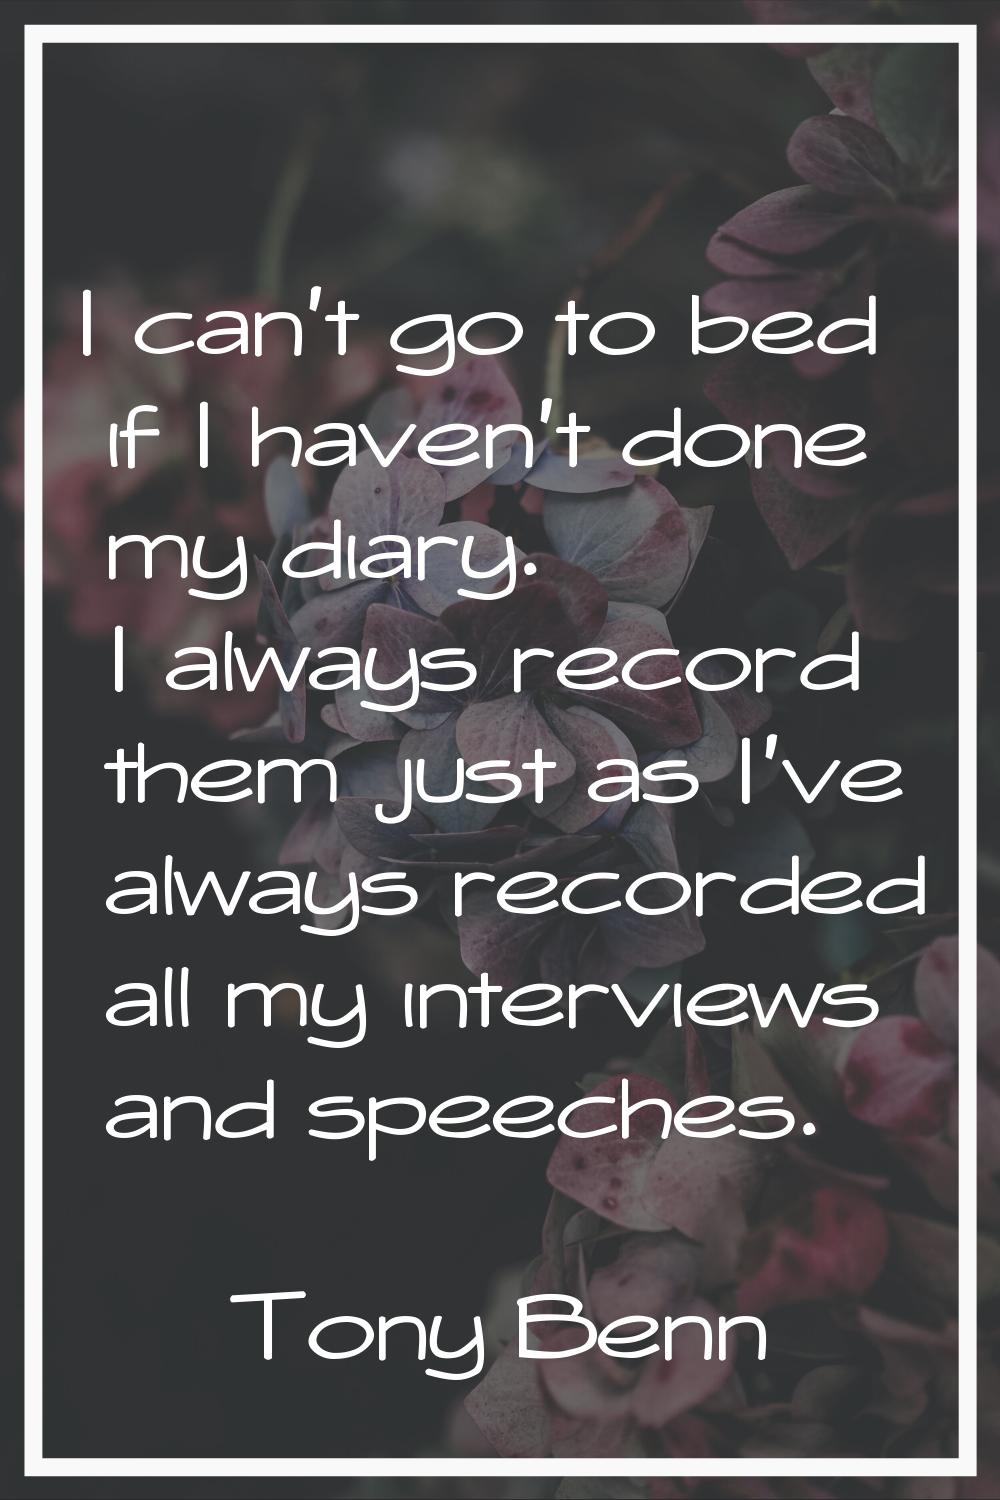 I can't go to bed if I haven't done my diary. I always record them just as I've always recorded all